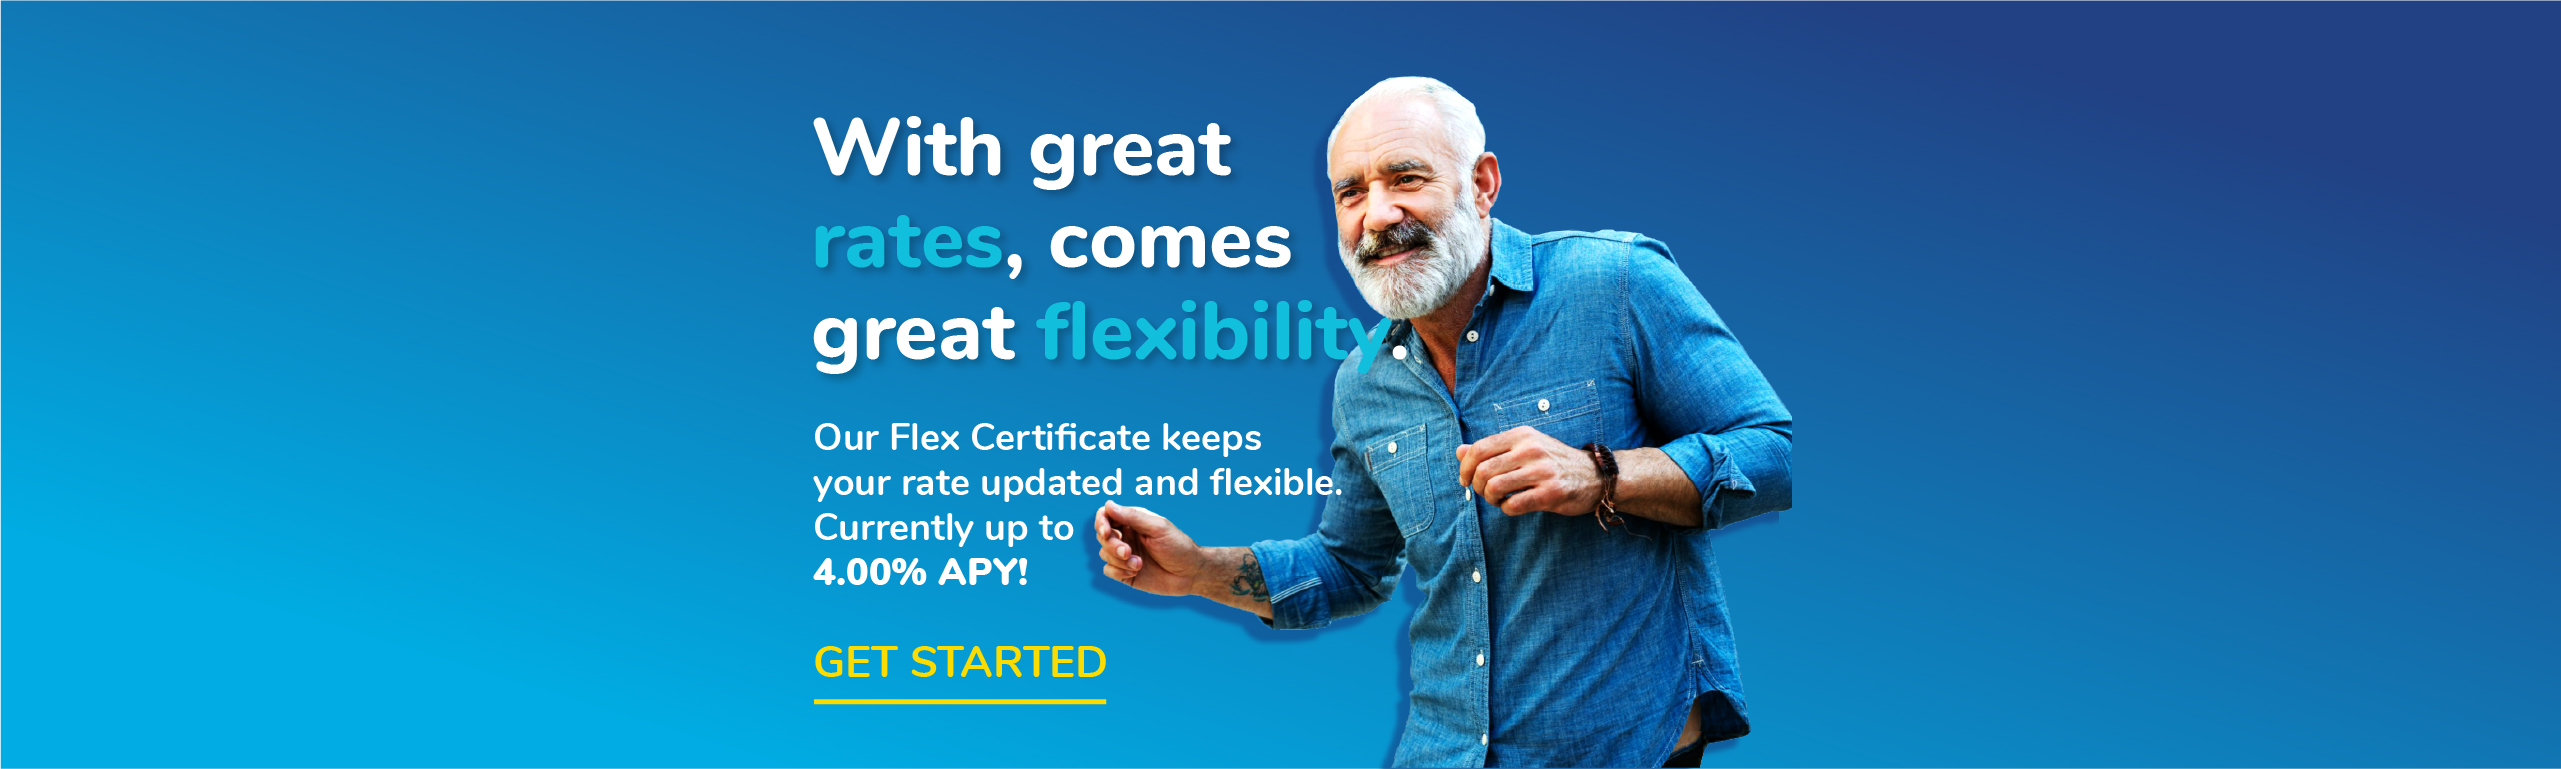 Flex Certificate is here for a limited time!